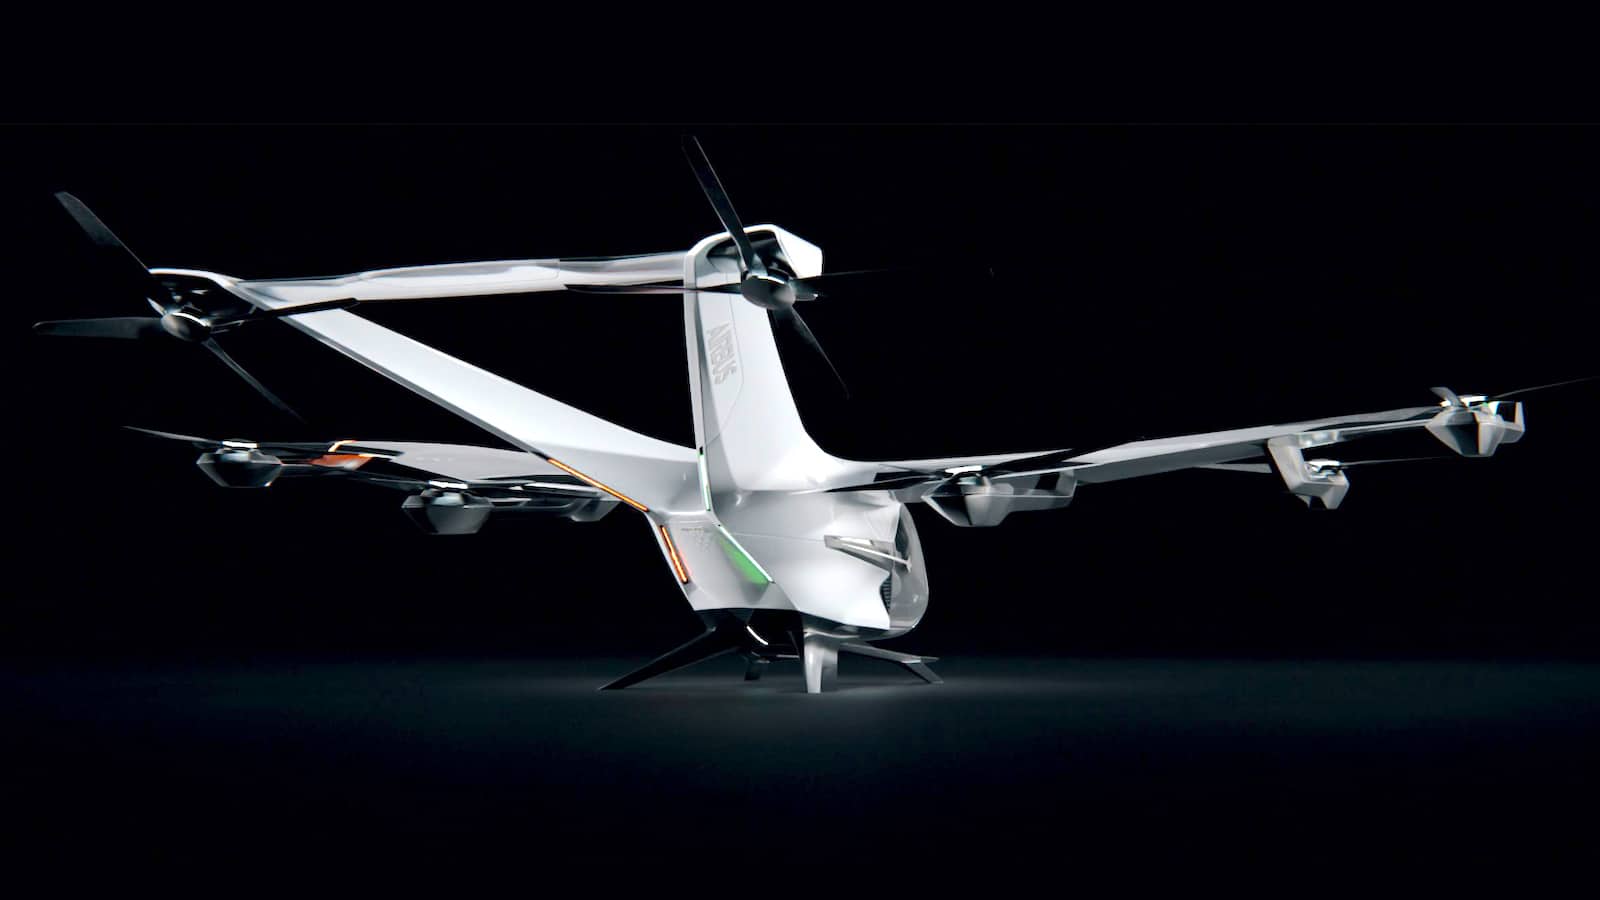 Two separate Airbus group entities—the Silicon Valley-based A3 by Airbus advanced technology subsidiary and Airbus Helicopters—are leading efforts to launch Airbus's entry to the eVTOL market with a pair of technology demonstrators being used to define the planned design.